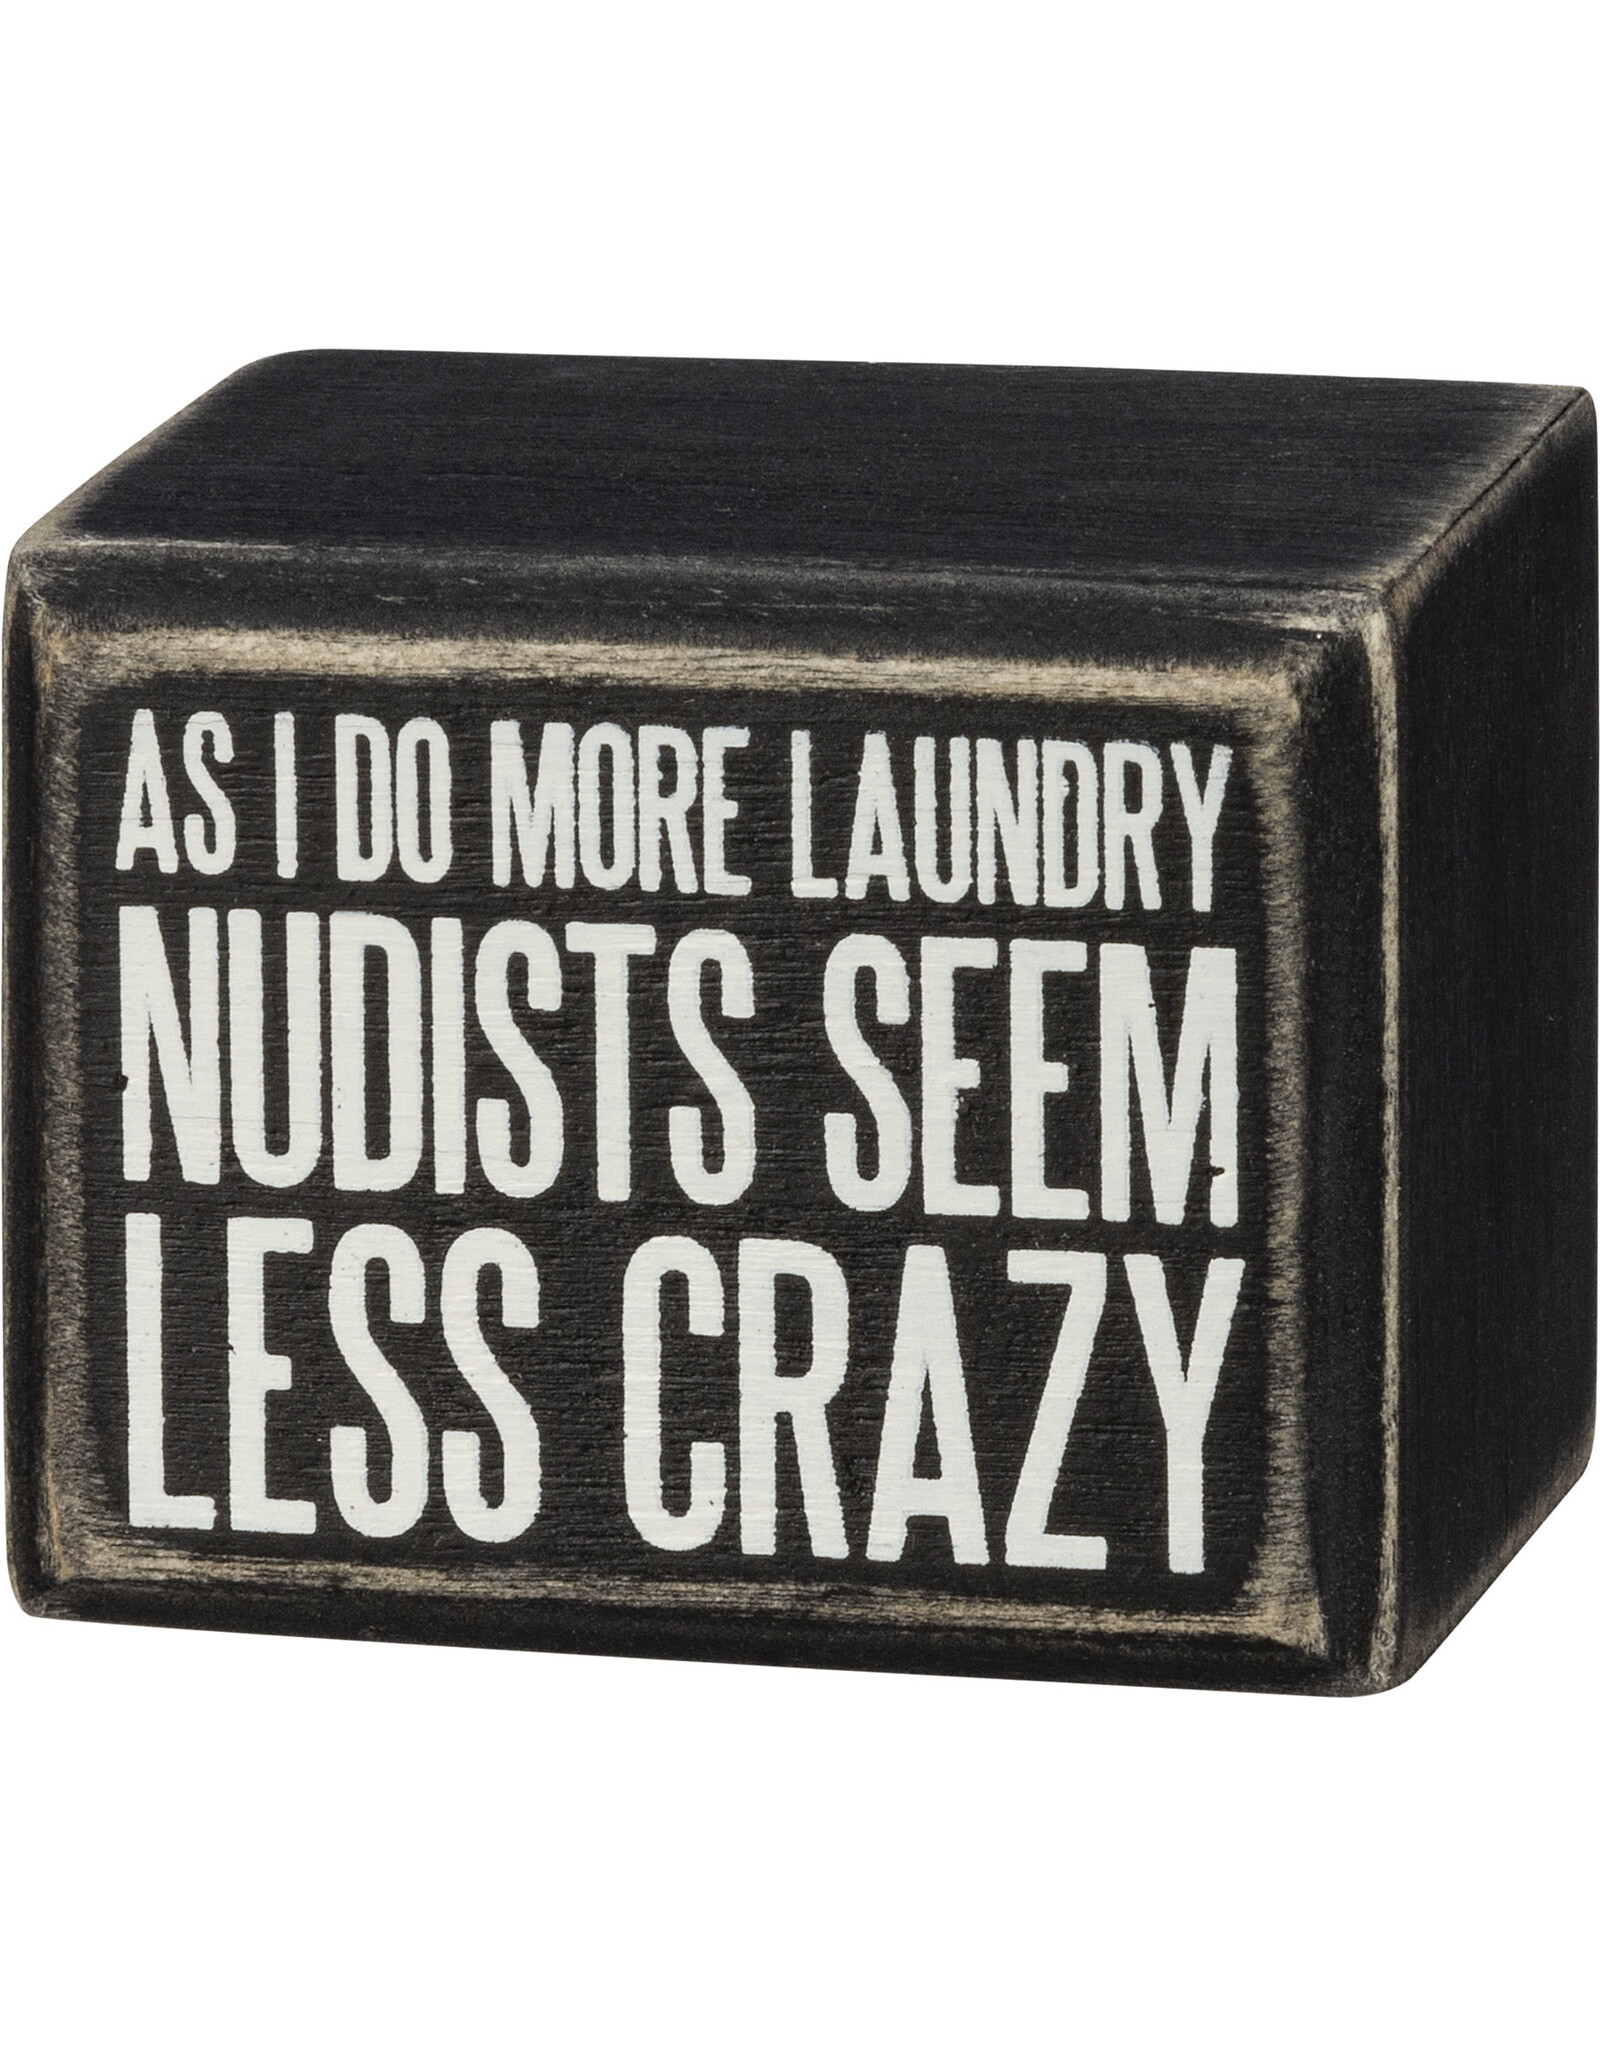 PRIMITIVES BY KATHY ATTITUDE BLOCK SIGNS LAUNDRY NUDISTS CRAZY